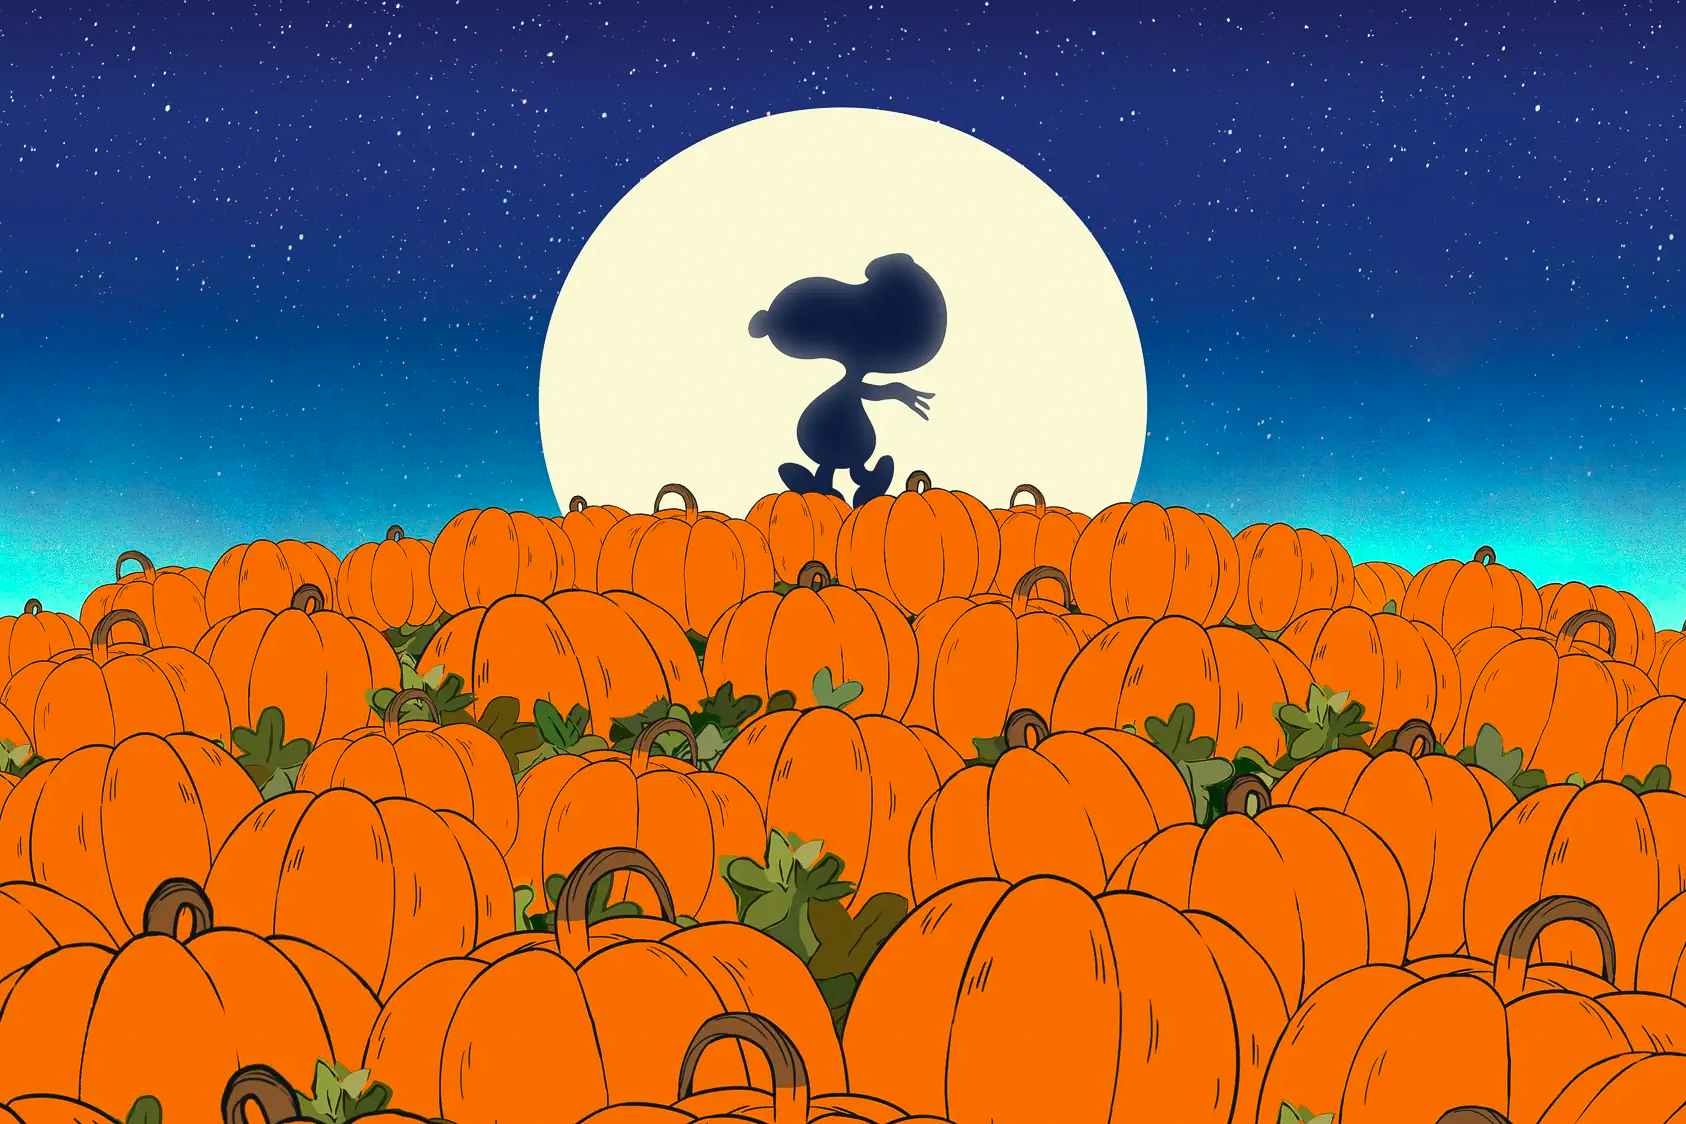 A still from the preview of It's The Great Pumpkin Charlie Brown on the Apple TV+ website.